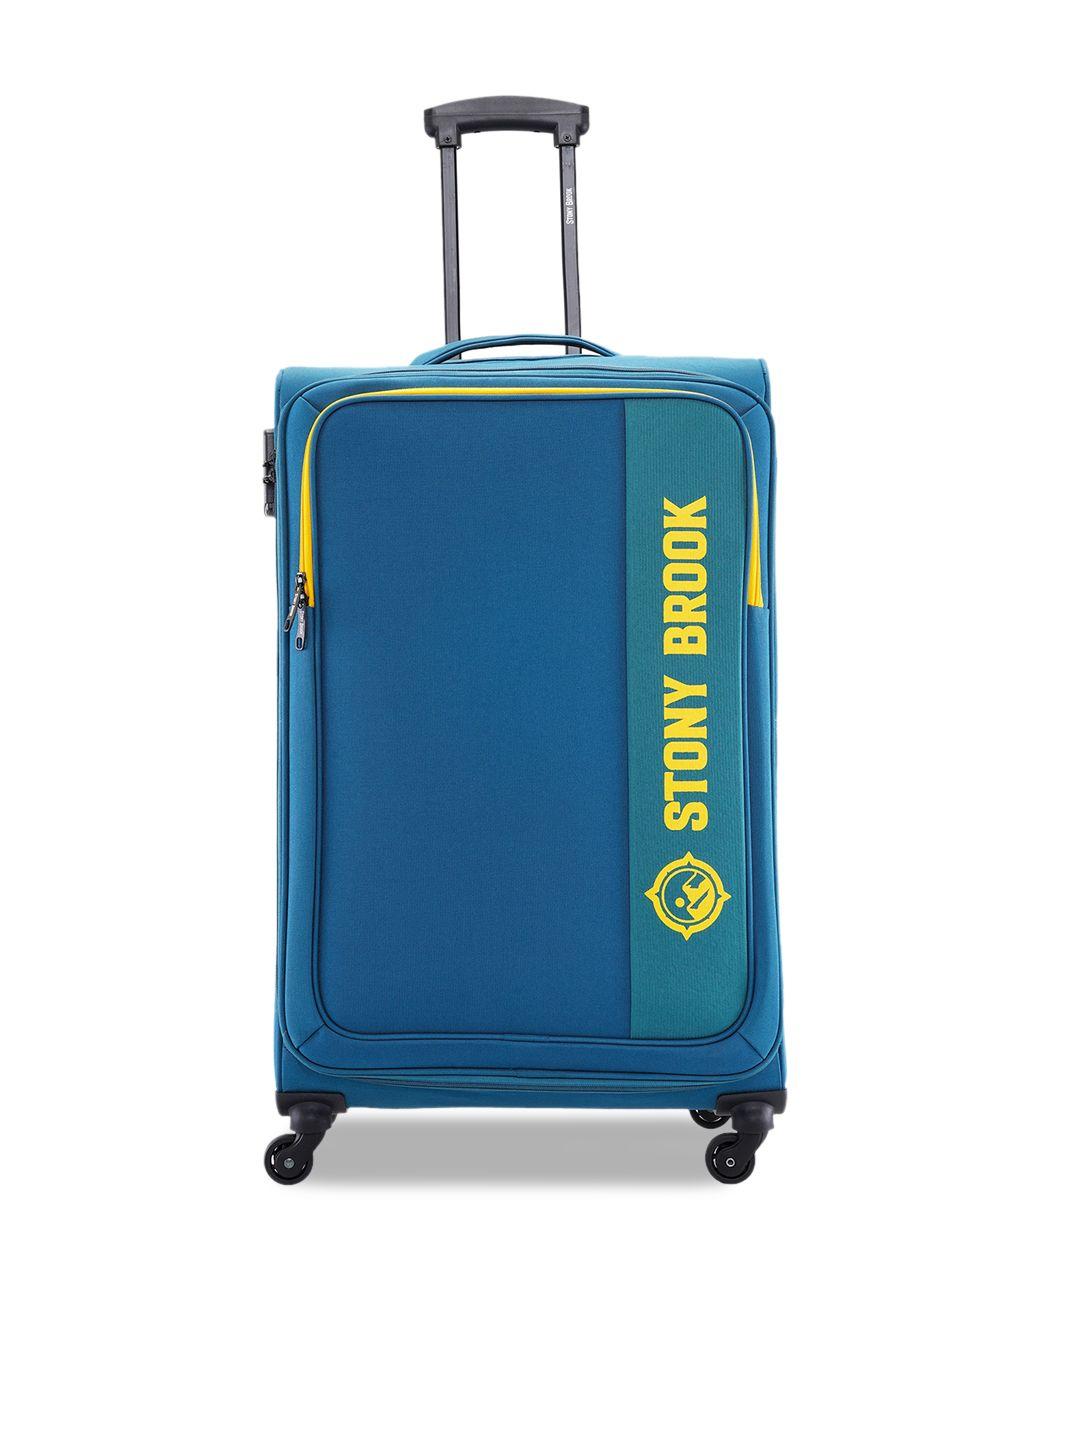 stony brook by nasher miles soft-sided large trolley suitcase